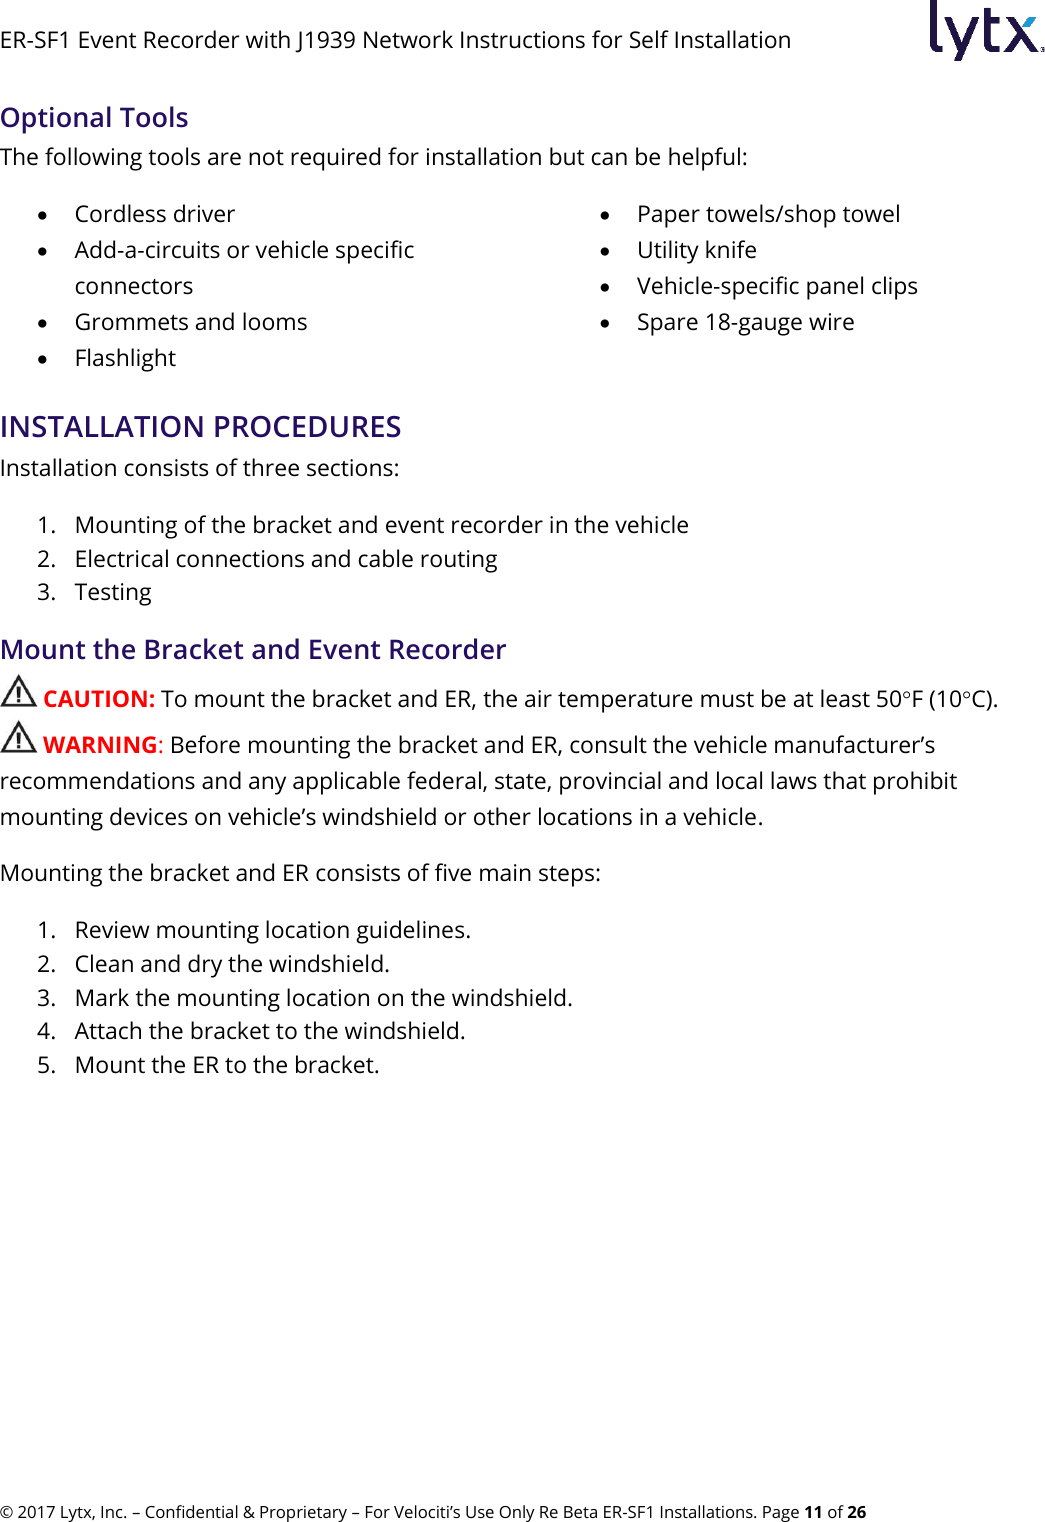 ER-SF1 Event Recorder with J1939 Network Instructions for Self Installation © 2017 Lytx, Inc. – Confidential &amp; Proprietary – For Velociti’s Use Only Re Beta ER-SF1 Installations. Page 11 of 26 Optional Tools The following tools are not required for installation but can be helpful:   Cordless driver  Add-a-circuits or vehicle specific connectors  Grommets and looms  Flashlight  Paper towels/shop towel  Utility knife  Vehicle-specific panel clips  Spare 18-gauge wireINSTALLATION PROCEDURES Installation consists of three sections: 1. Mounting of the bracket and event recorder in the vehicle 2. Electrical connections and cable routing 3. Testing Mount the Bracket and Event Recorder  CAUTION: To mount the bracket and ER, the air temperature must be at least 50F (10C).  WARNING: Before mounting the bracket and ER, consult the vehicle manufacturer’s recommendations and any applicable federal, state, provincial and local laws that prohibit mounting devices on vehicle’s windshield or other locations in a vehicle. Mounting the bracket and ER consists of five main steps: 1. Review mounting location guidelines. 2. Clean and dry the windshield. 3. Mark the mounting location on the windshield. 4. Attach the bracket to the windshield. 5. Mount the ER to the bracket.   